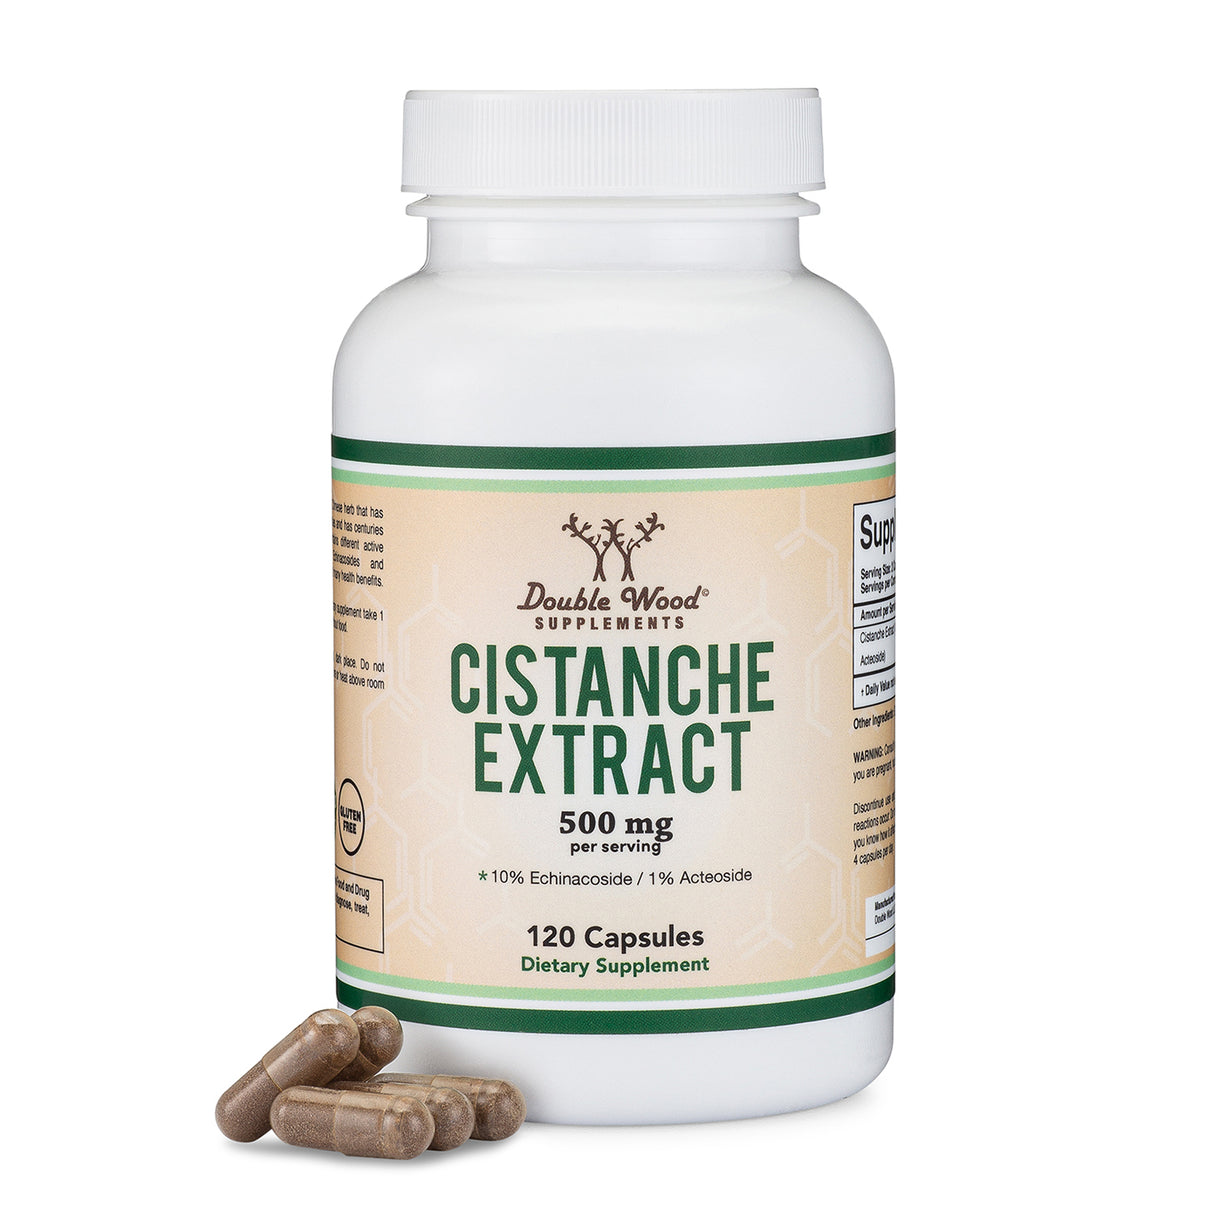 Cistanche Extract Supplement